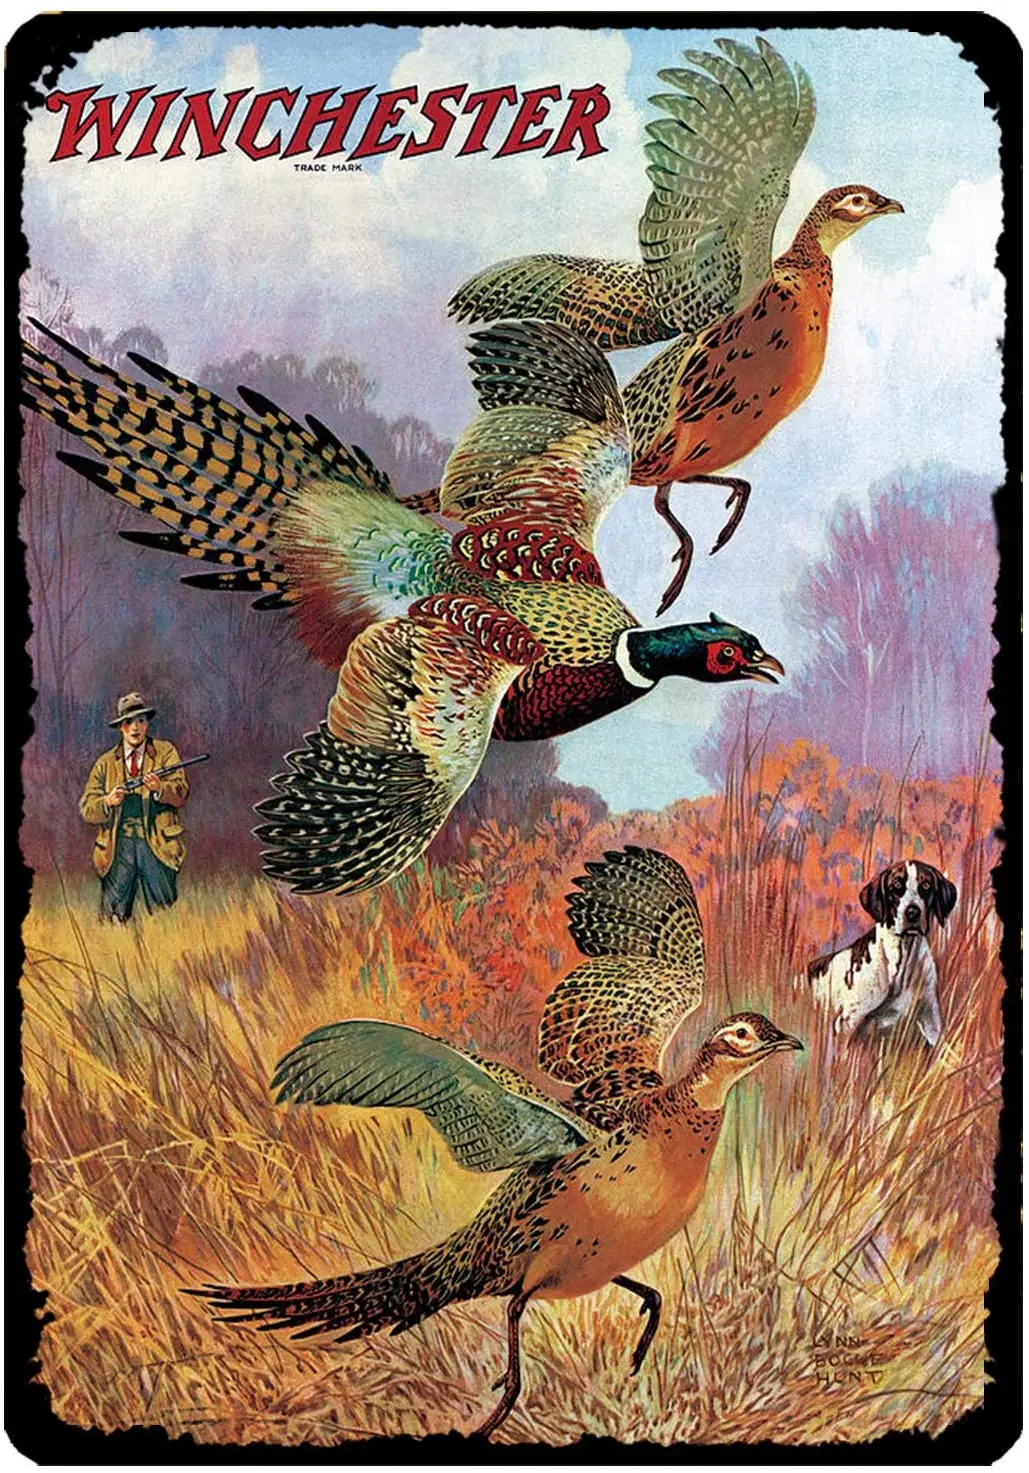 

Vintage Metal Tin Sign Pheasants on The Rise Winchester Hunter for Home Bar Pub Kitchen Garage Restaurant Wall Deocr Plaque Sign